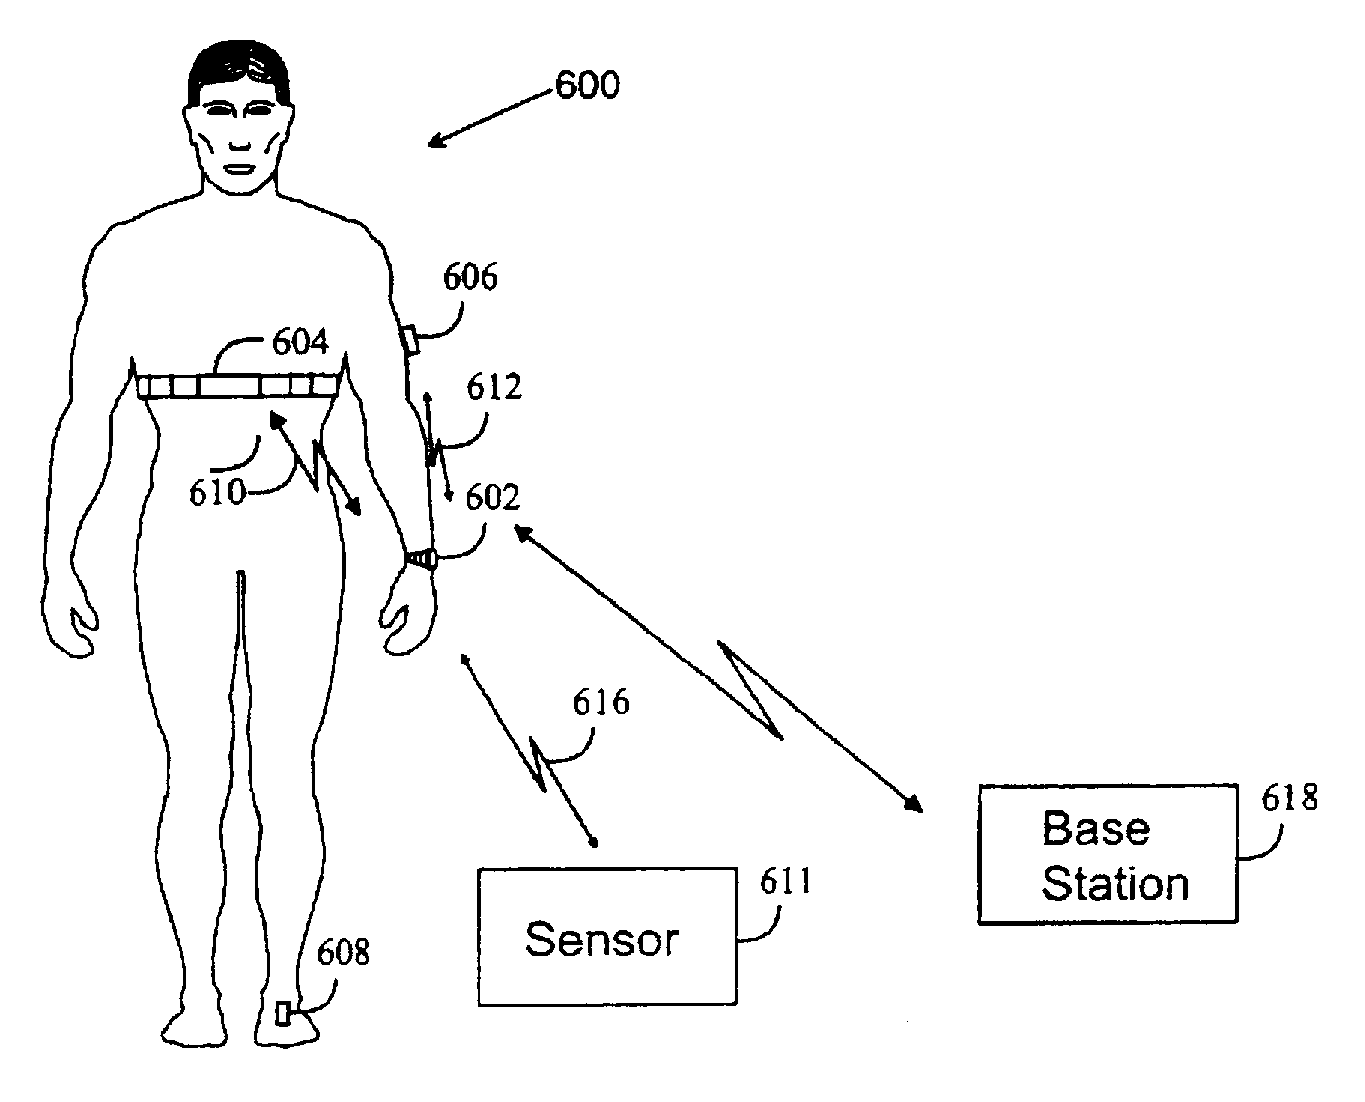 Apparatus for metabolic training load, mechanical stimulus, and recovery time calculation